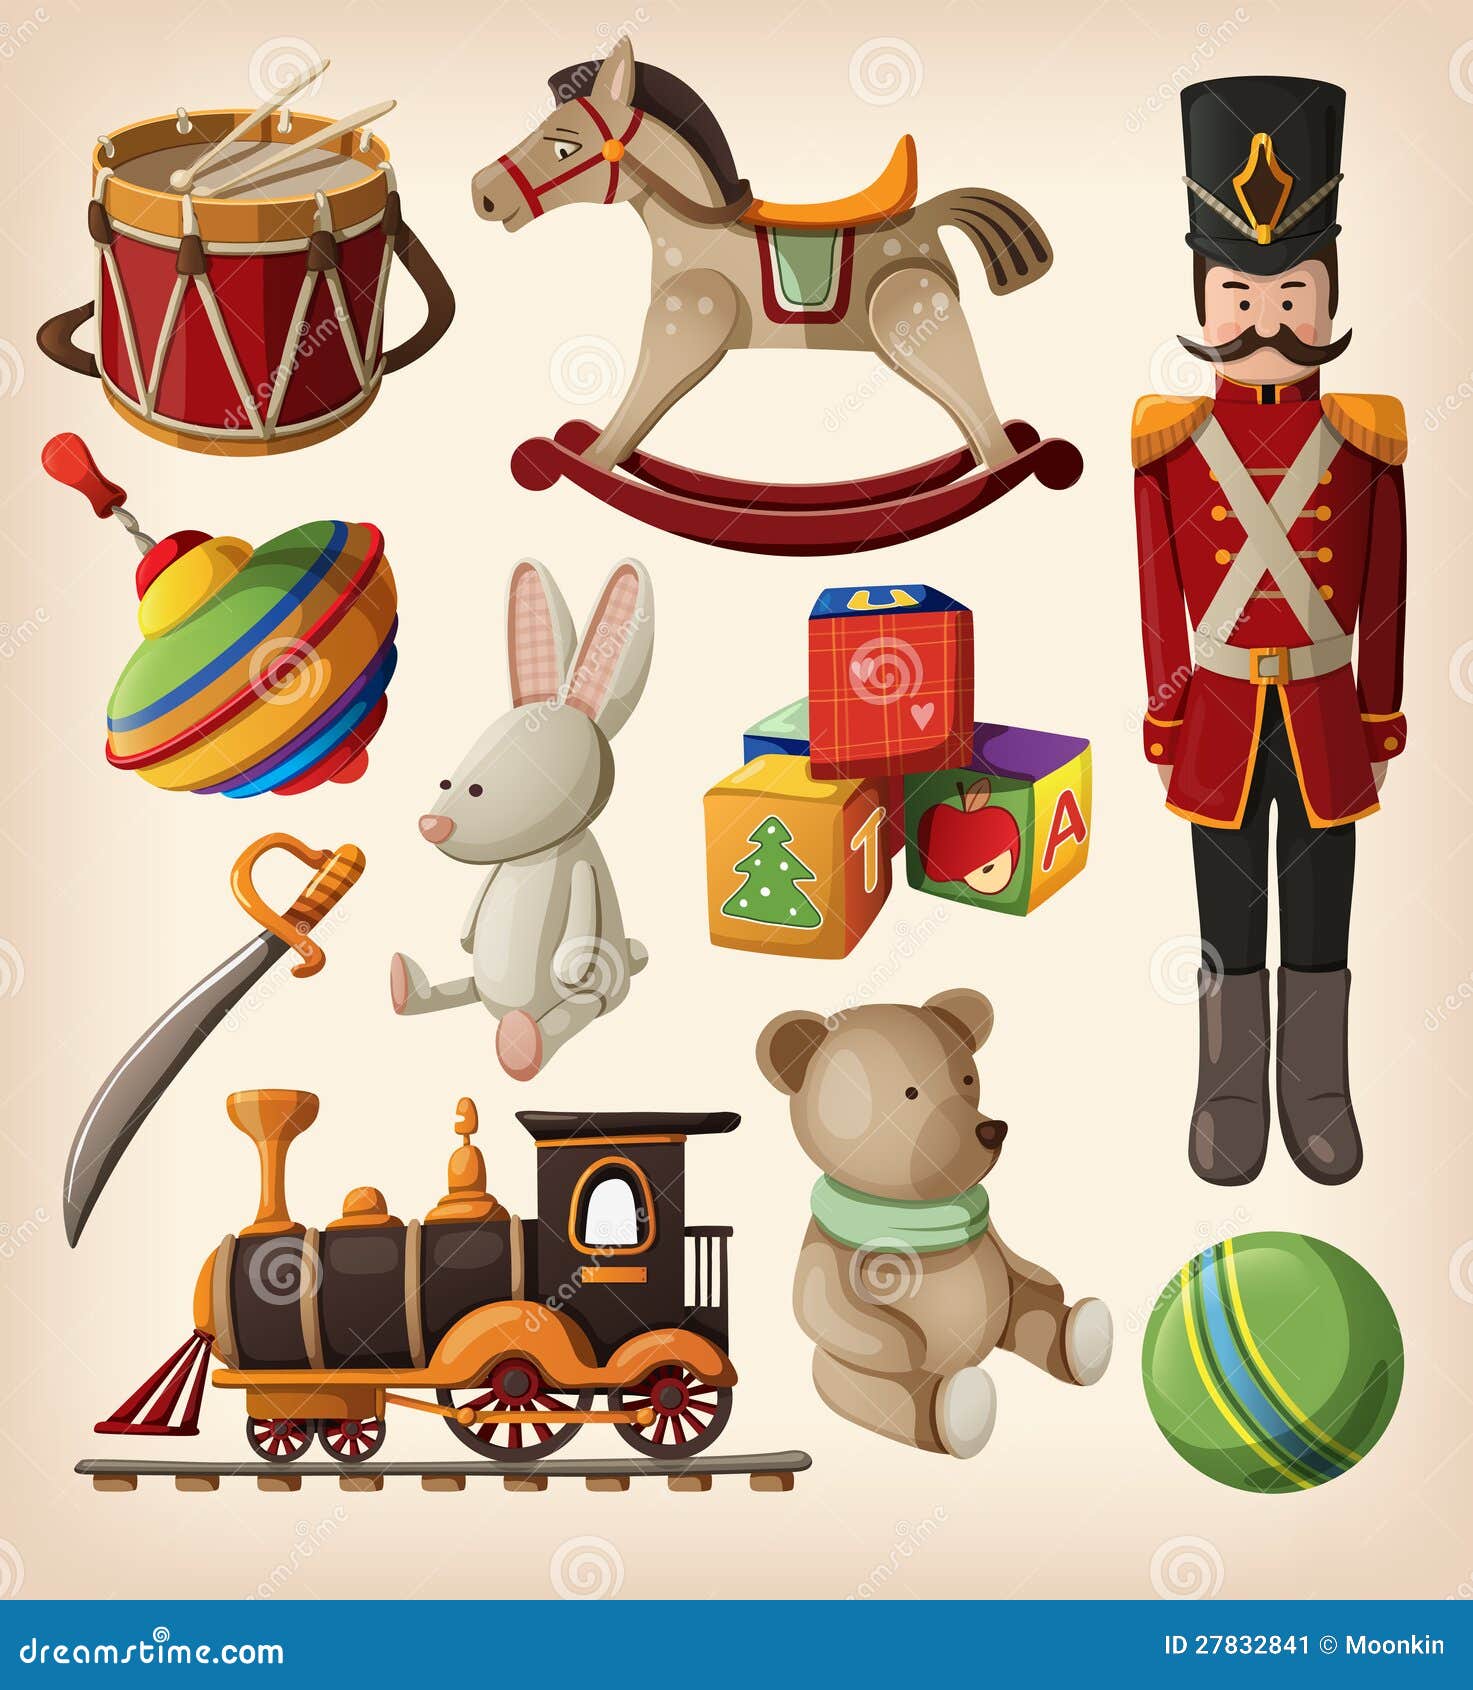 clipart of christmas toys - photo #26